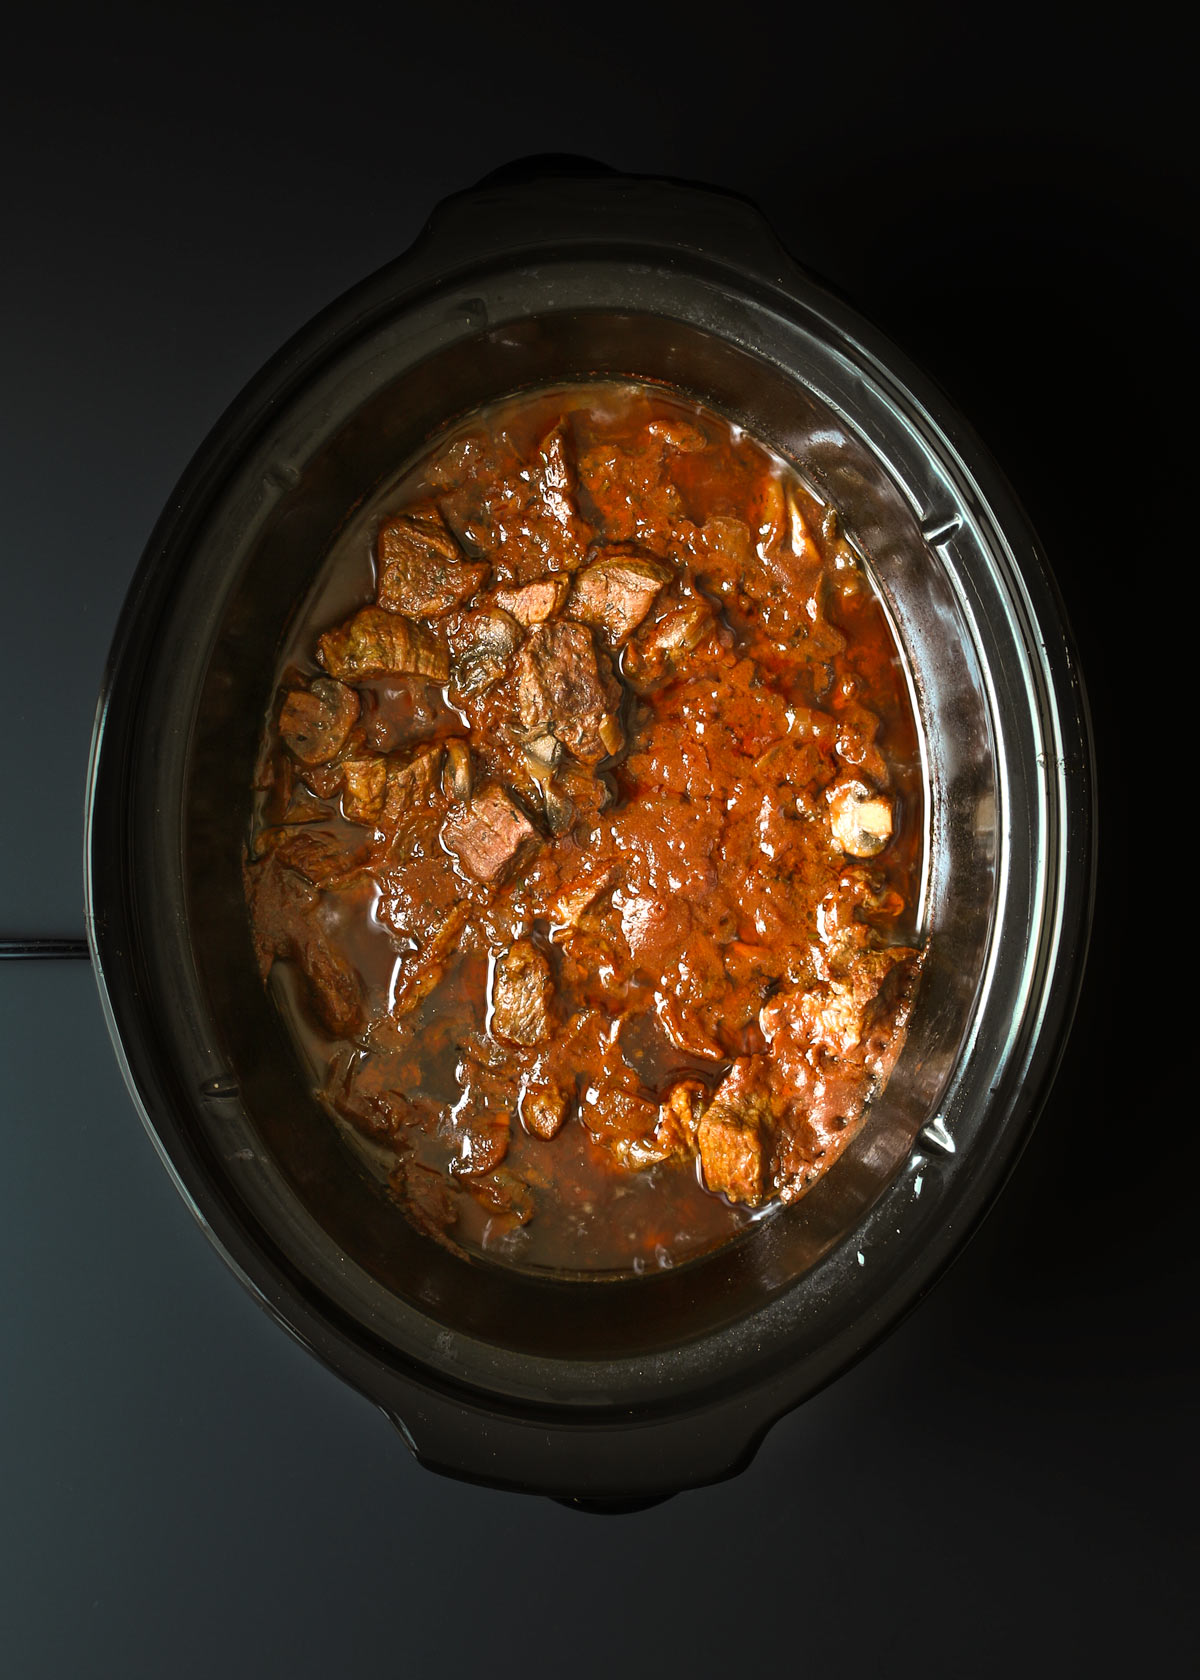 completed stew in a black slow cooker.